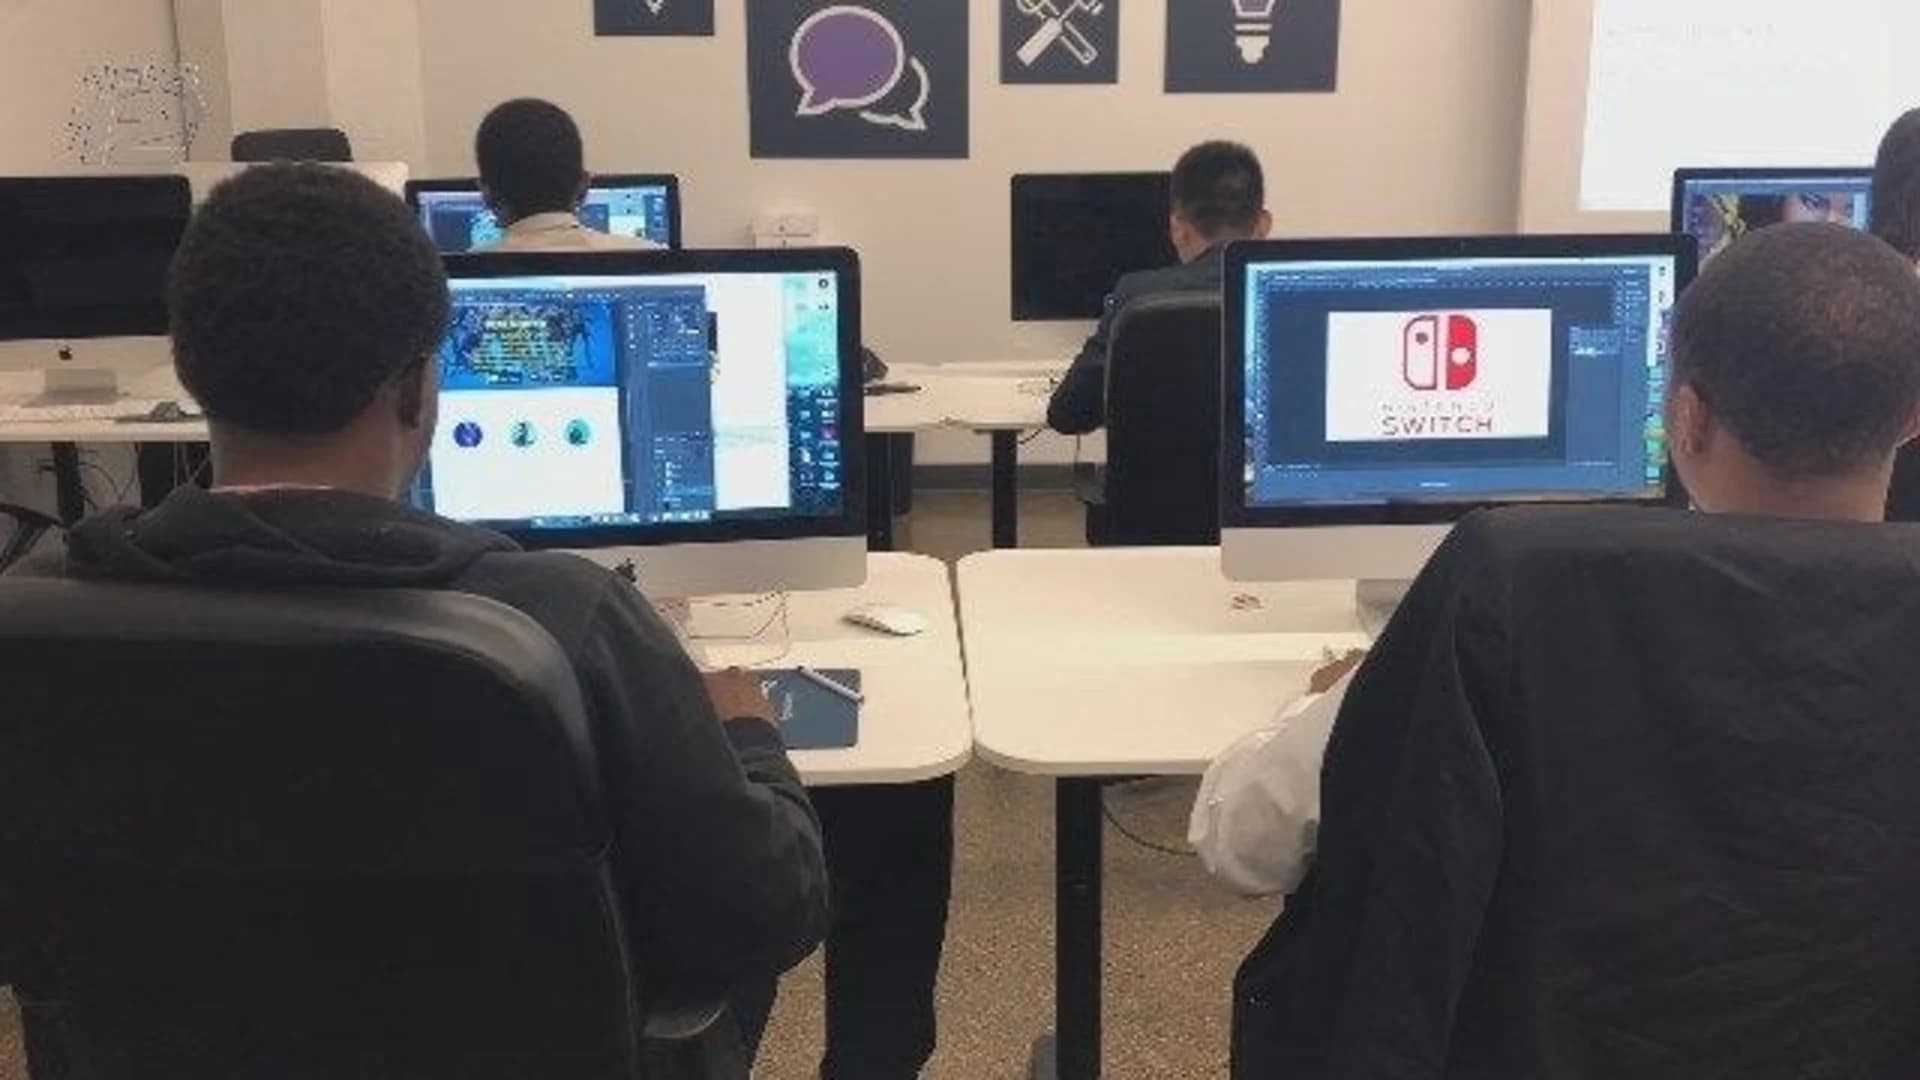 Innovation Lab offers free web design, coding courses for young adults